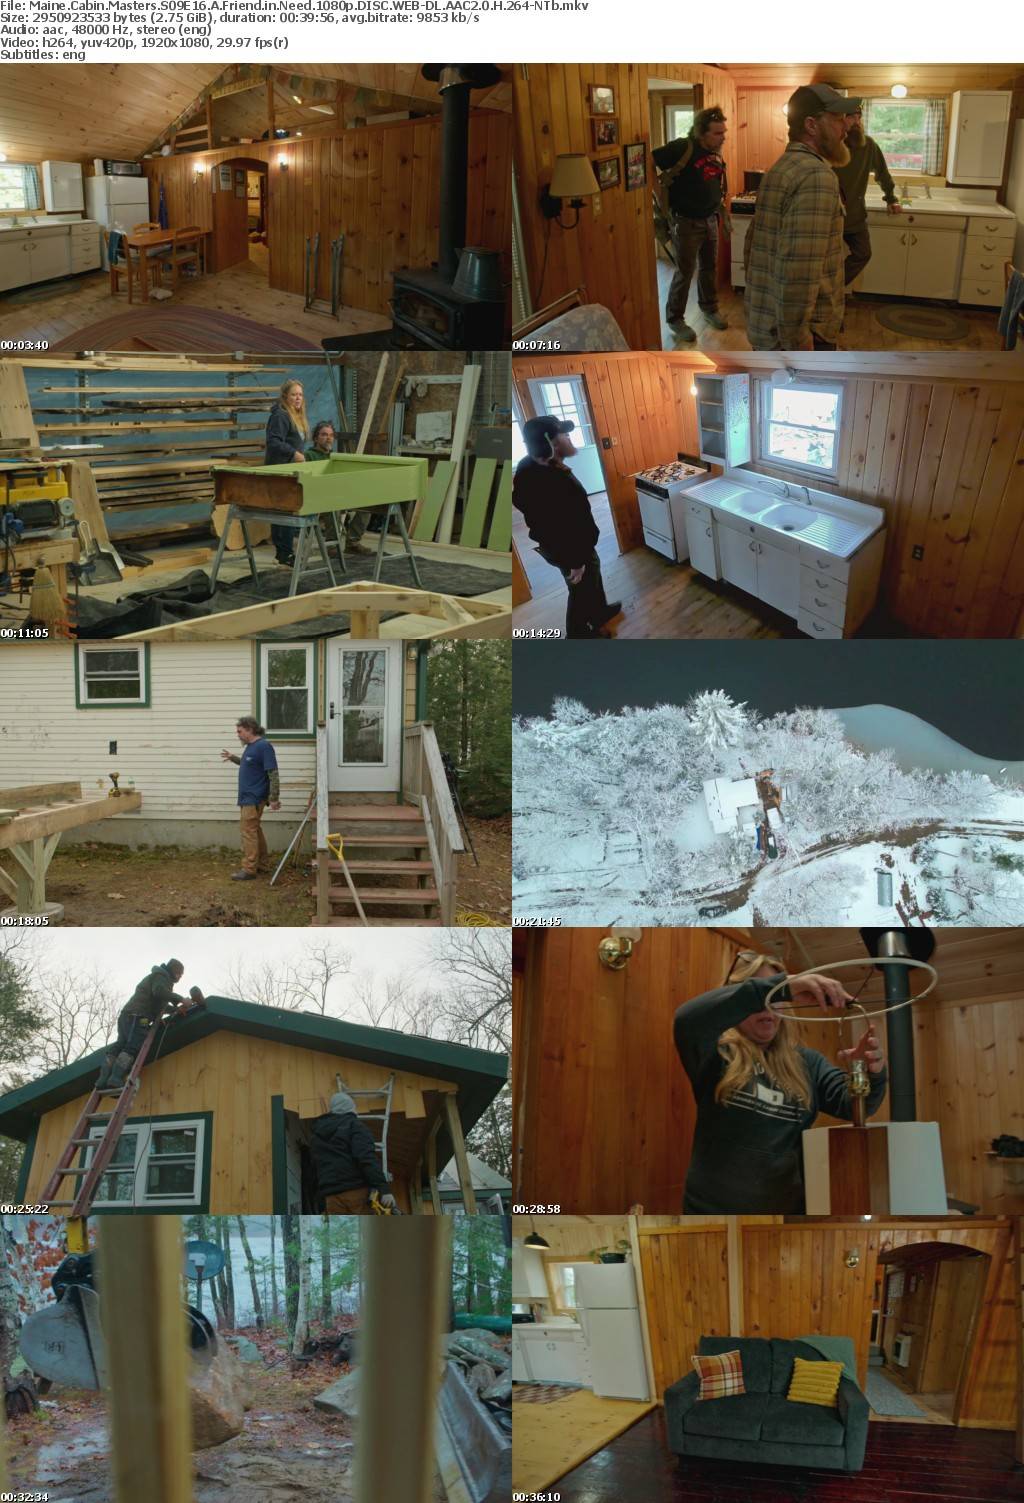 Maine Cabin Masters S09E16 A Friend in Need 1080p DISC WEB-DL AAC2 0 H 264-NTb